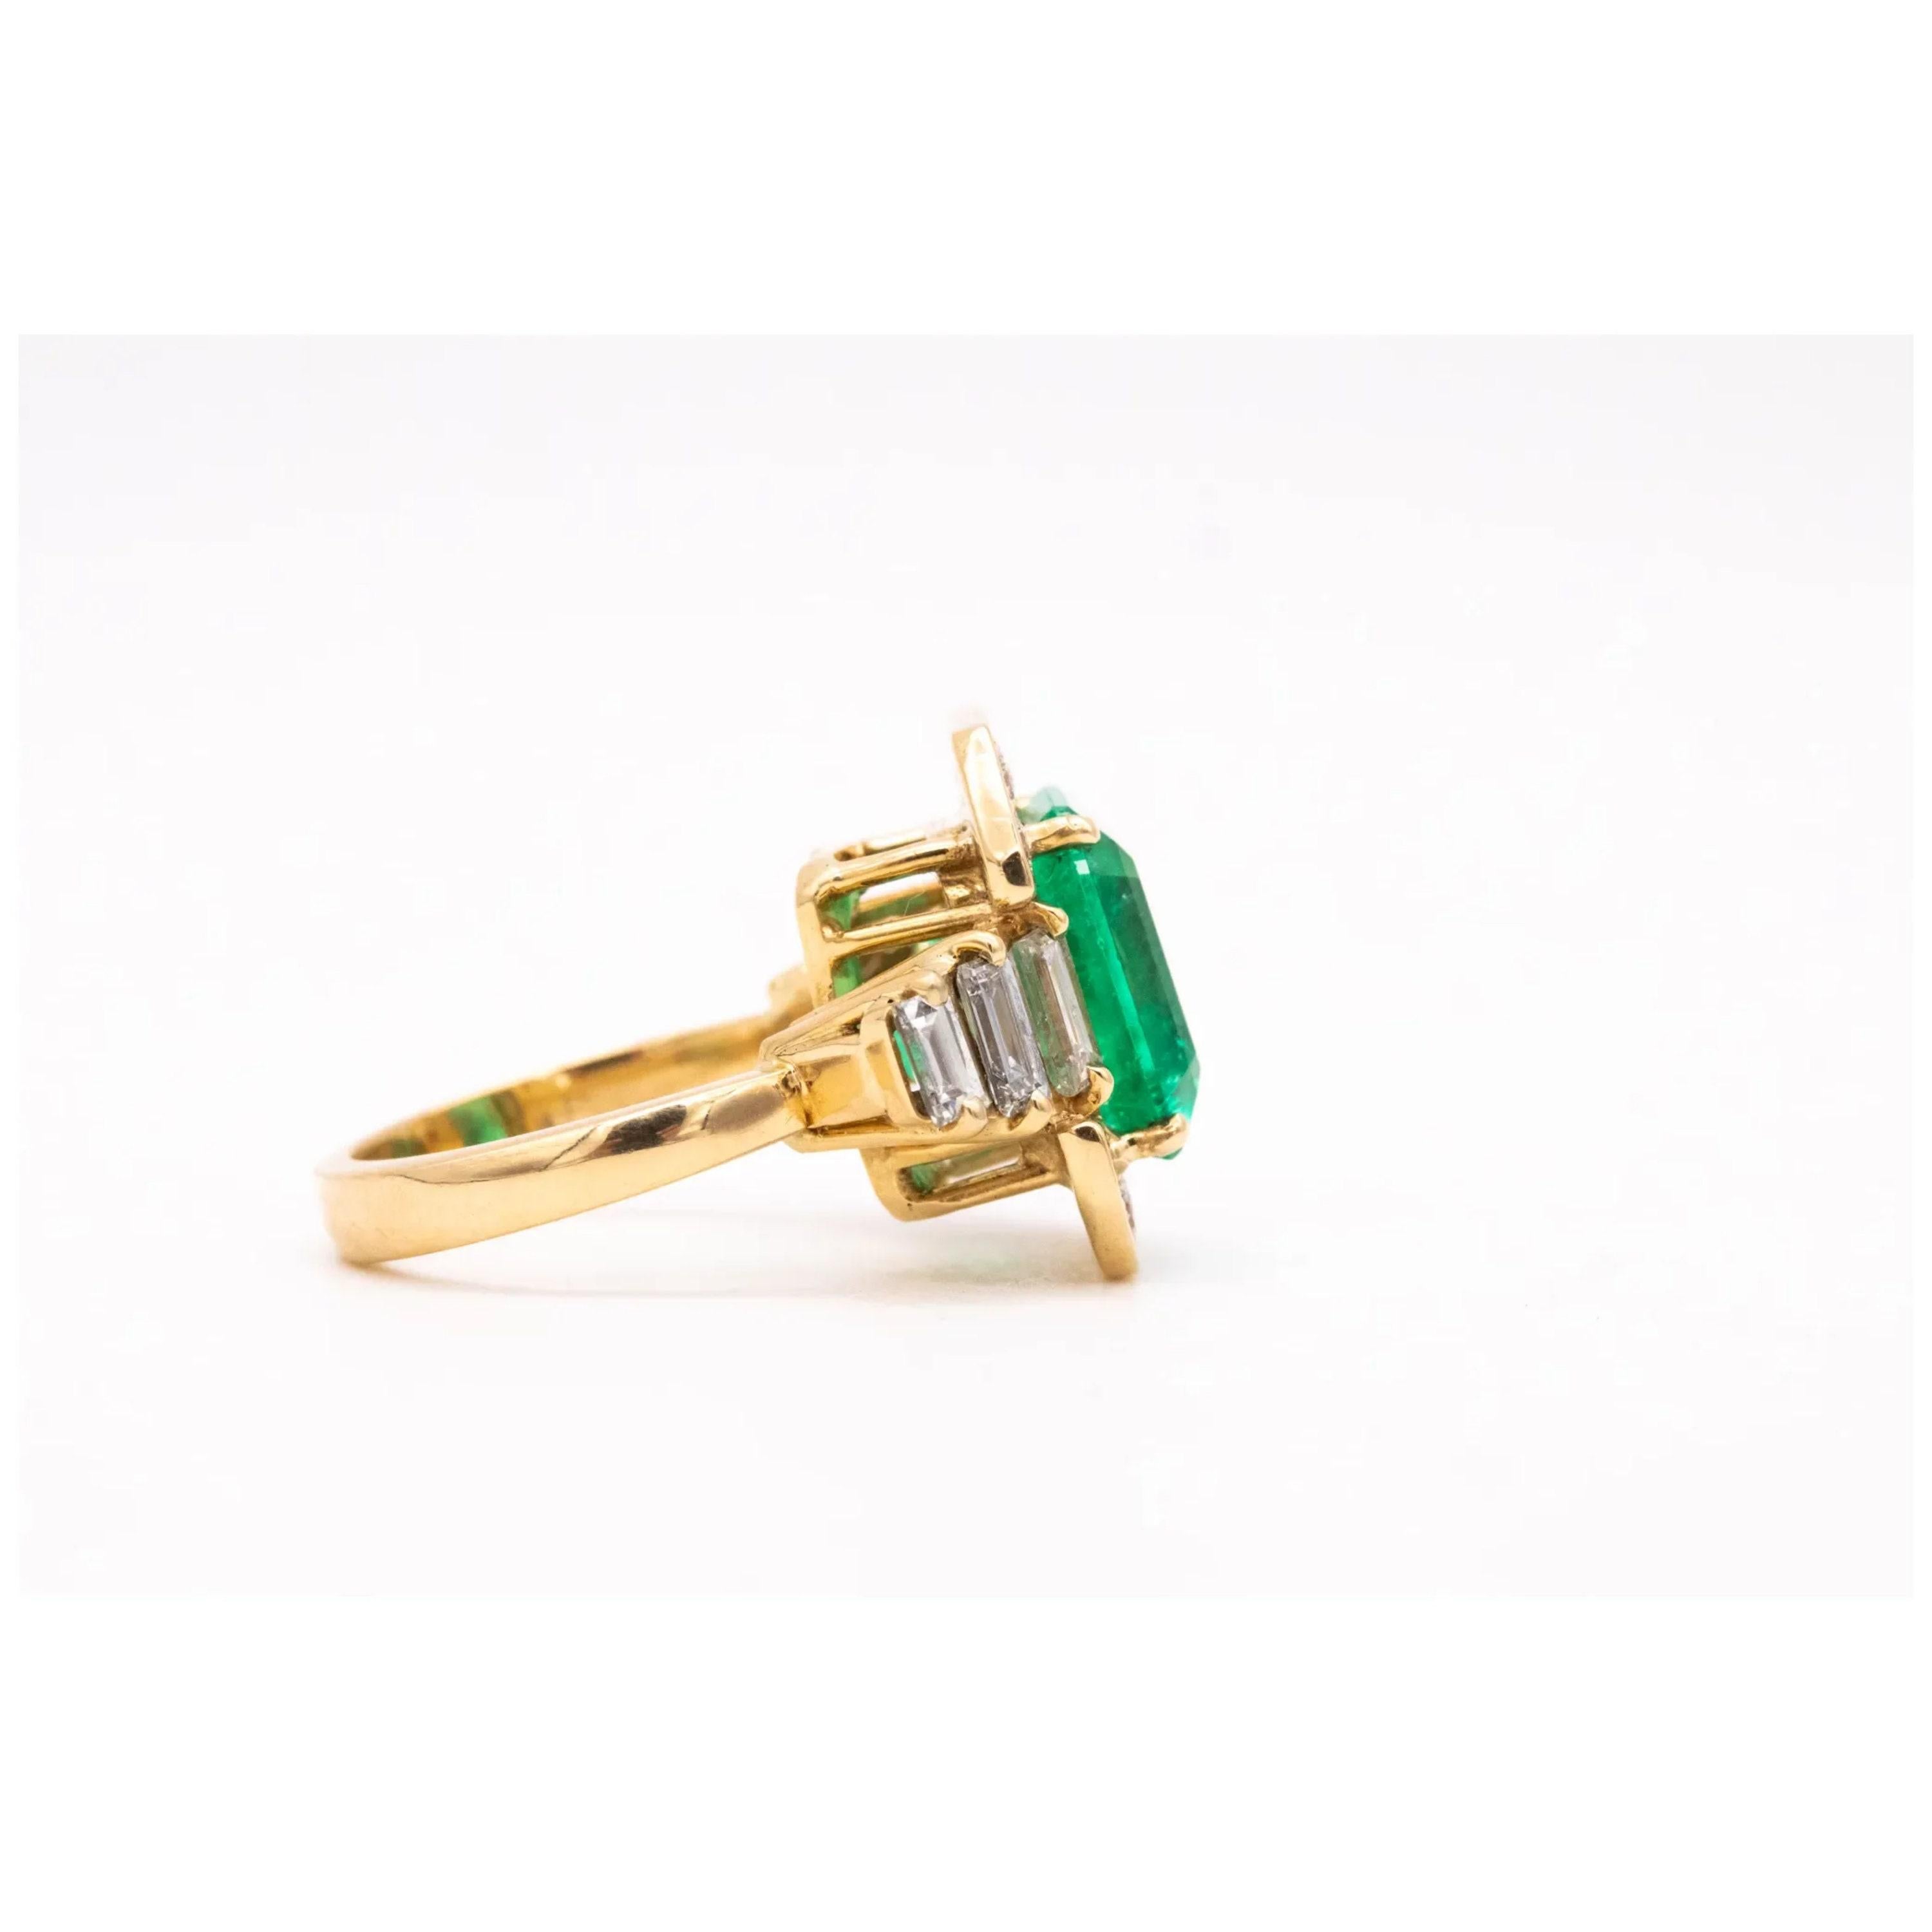 For Sale:  Certified 4.03 Carat Emerald Diamond Vintage Style Cocktail Ring in 18K Gold 3